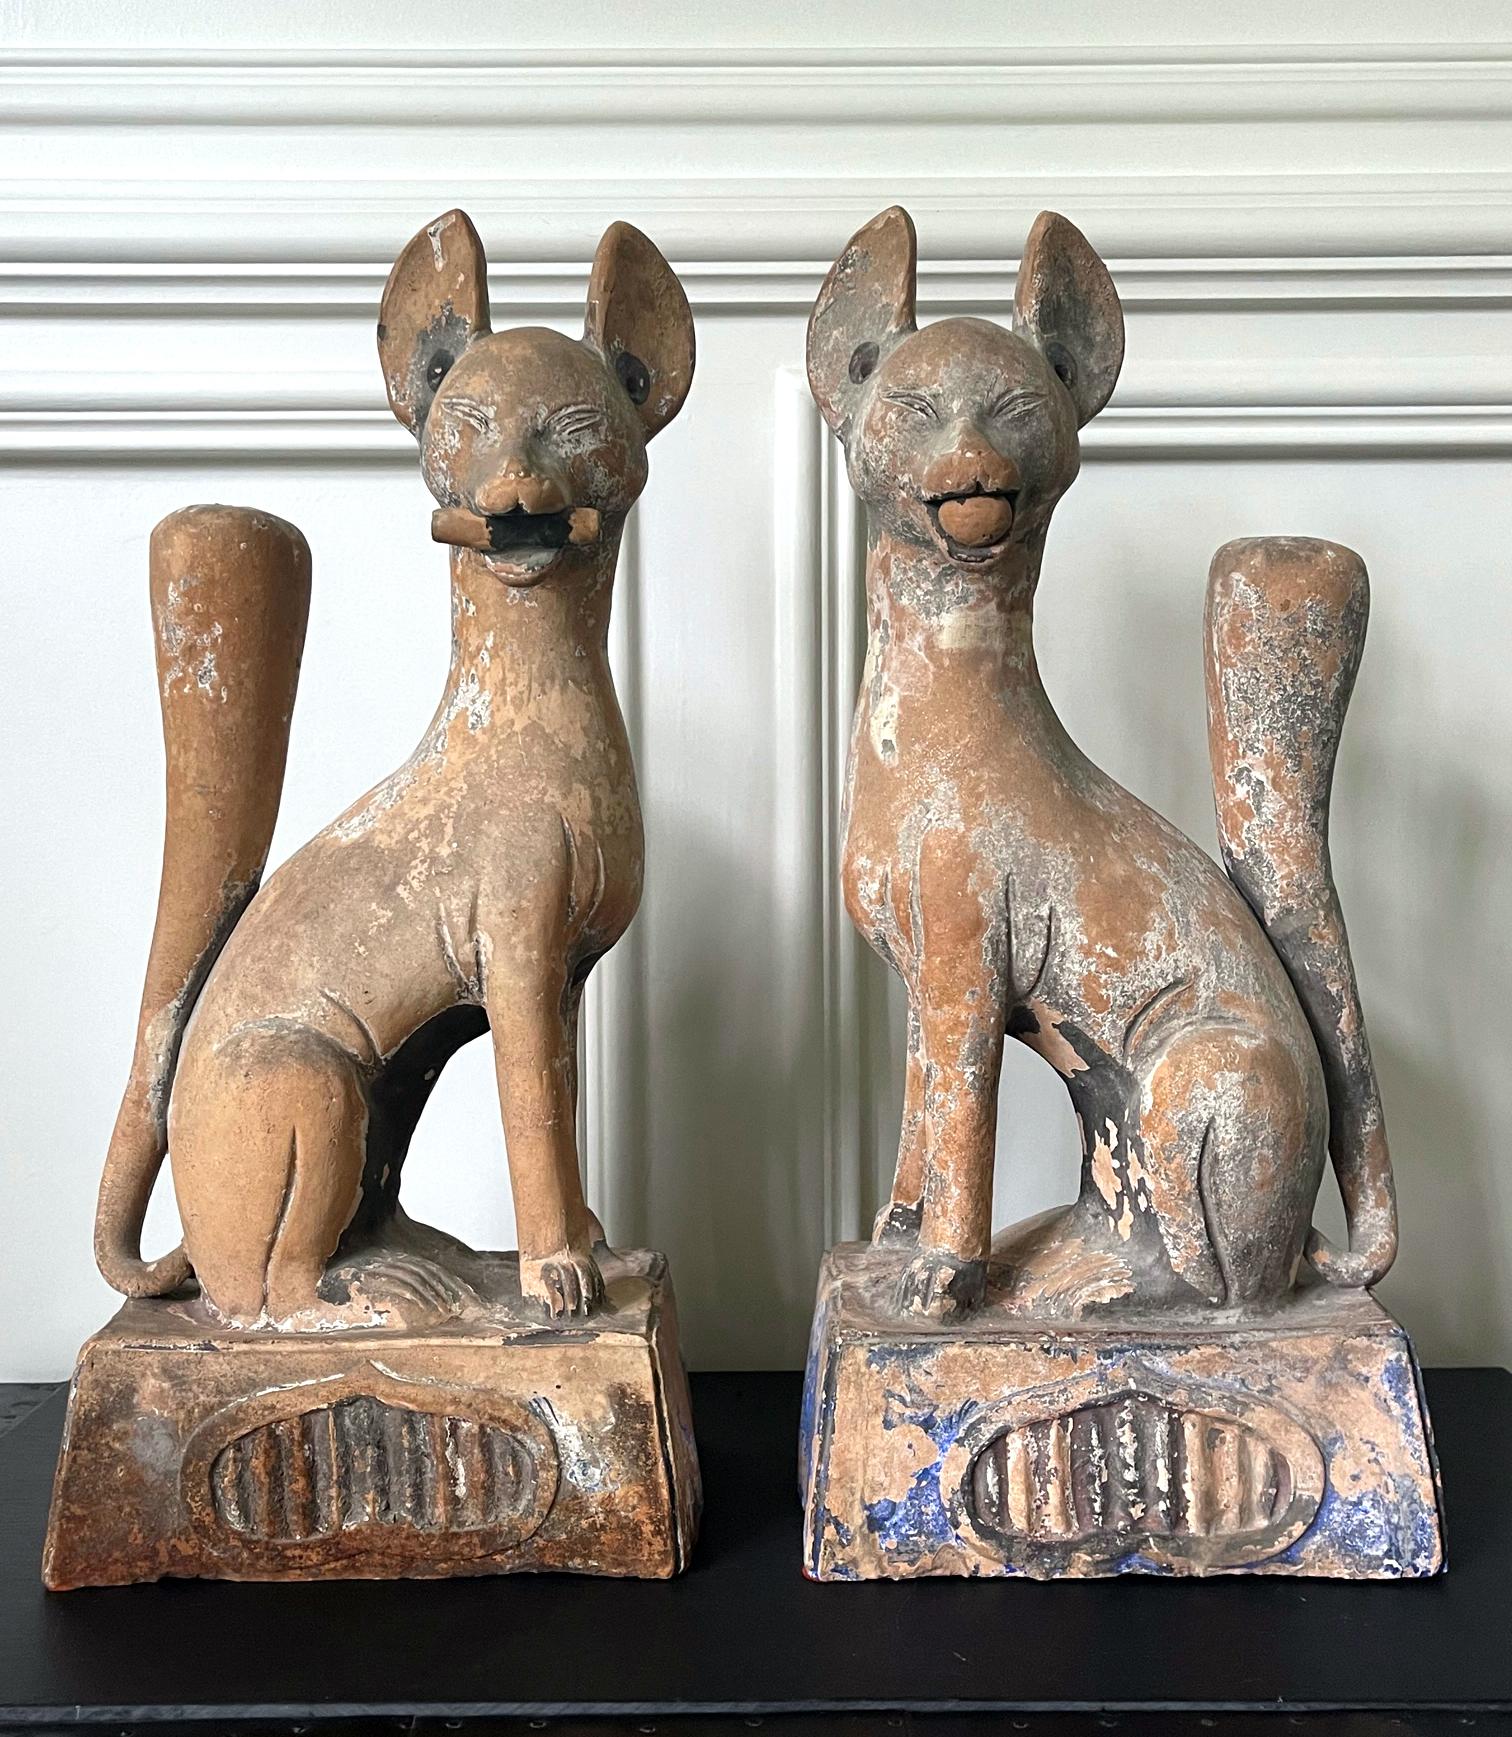 On offer is a pair of Japanese kitsune statues on plinth made from molded pottery. In Japanese Shinto religion and folklore, kitsune (fox) is a spirited animal that represents a wide range of concepts depending on the context. They tend to be